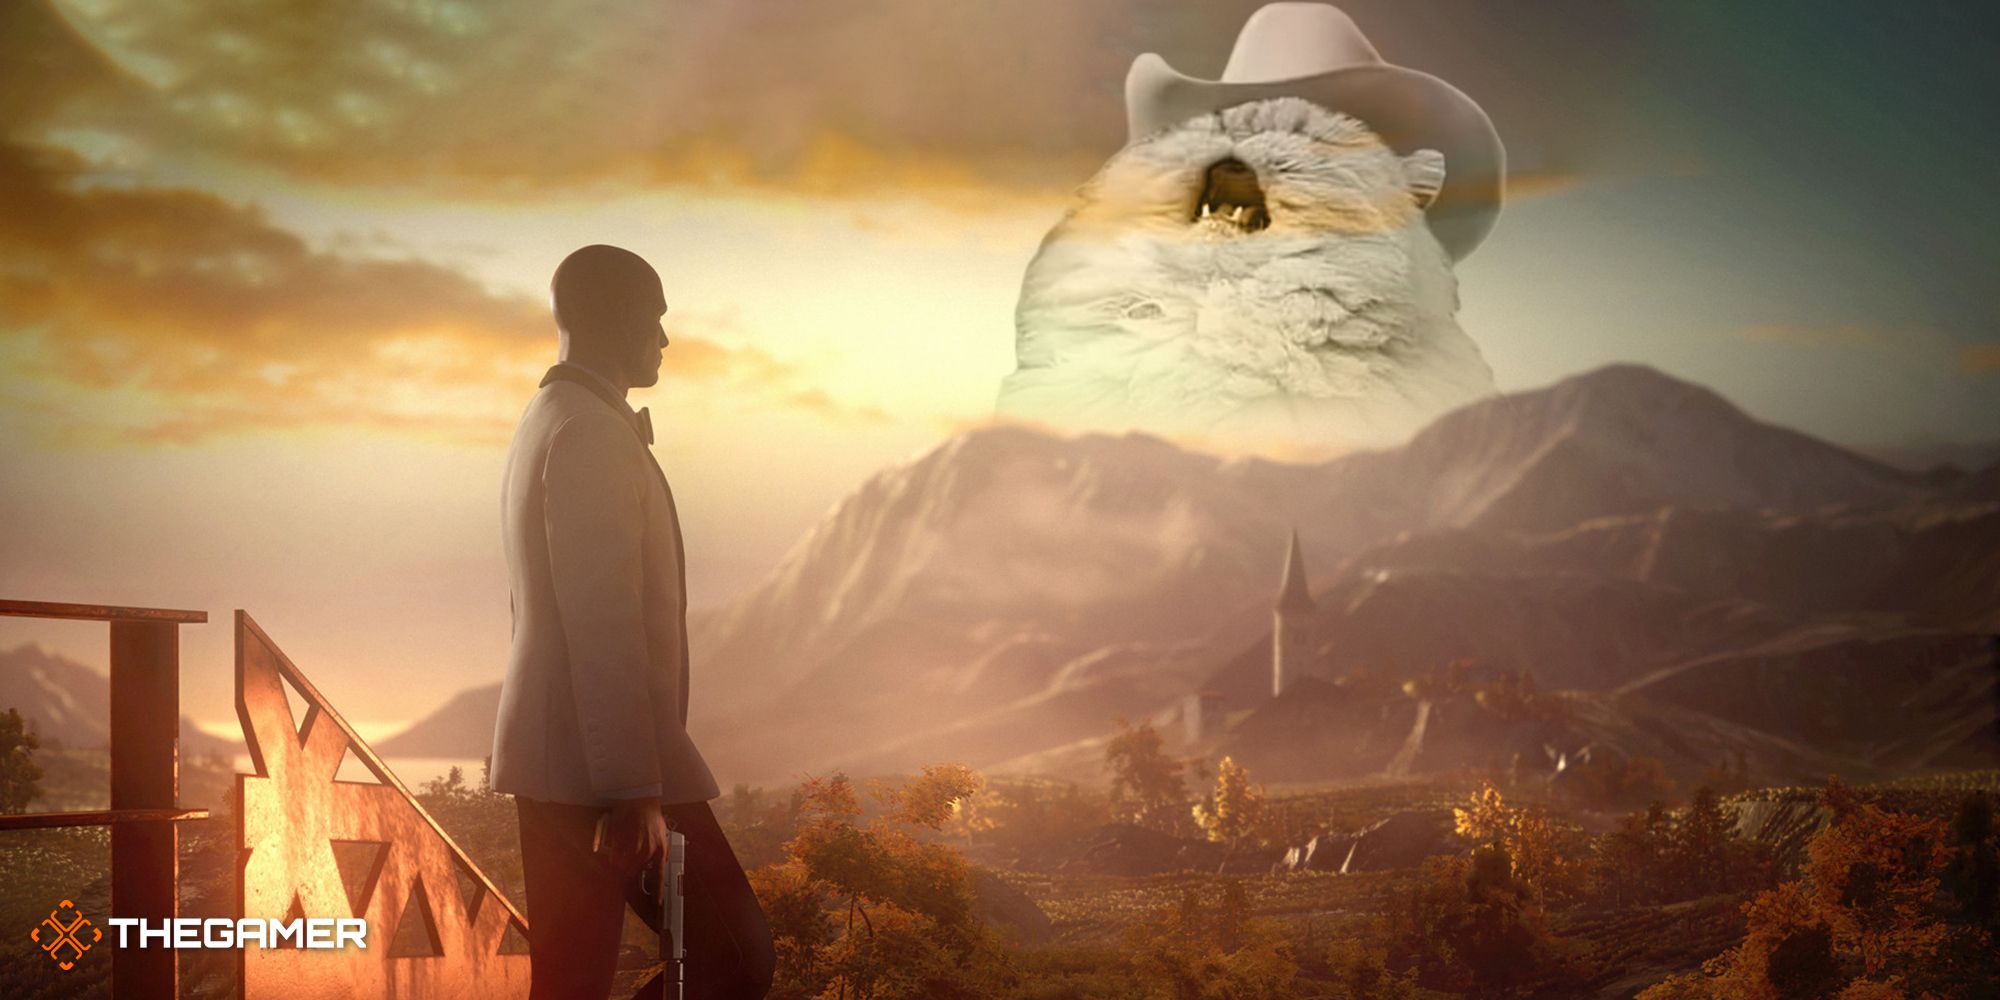 Agent 47 looking over a landscape with gun in hand while a giant cat with a hat screams behind a mountain